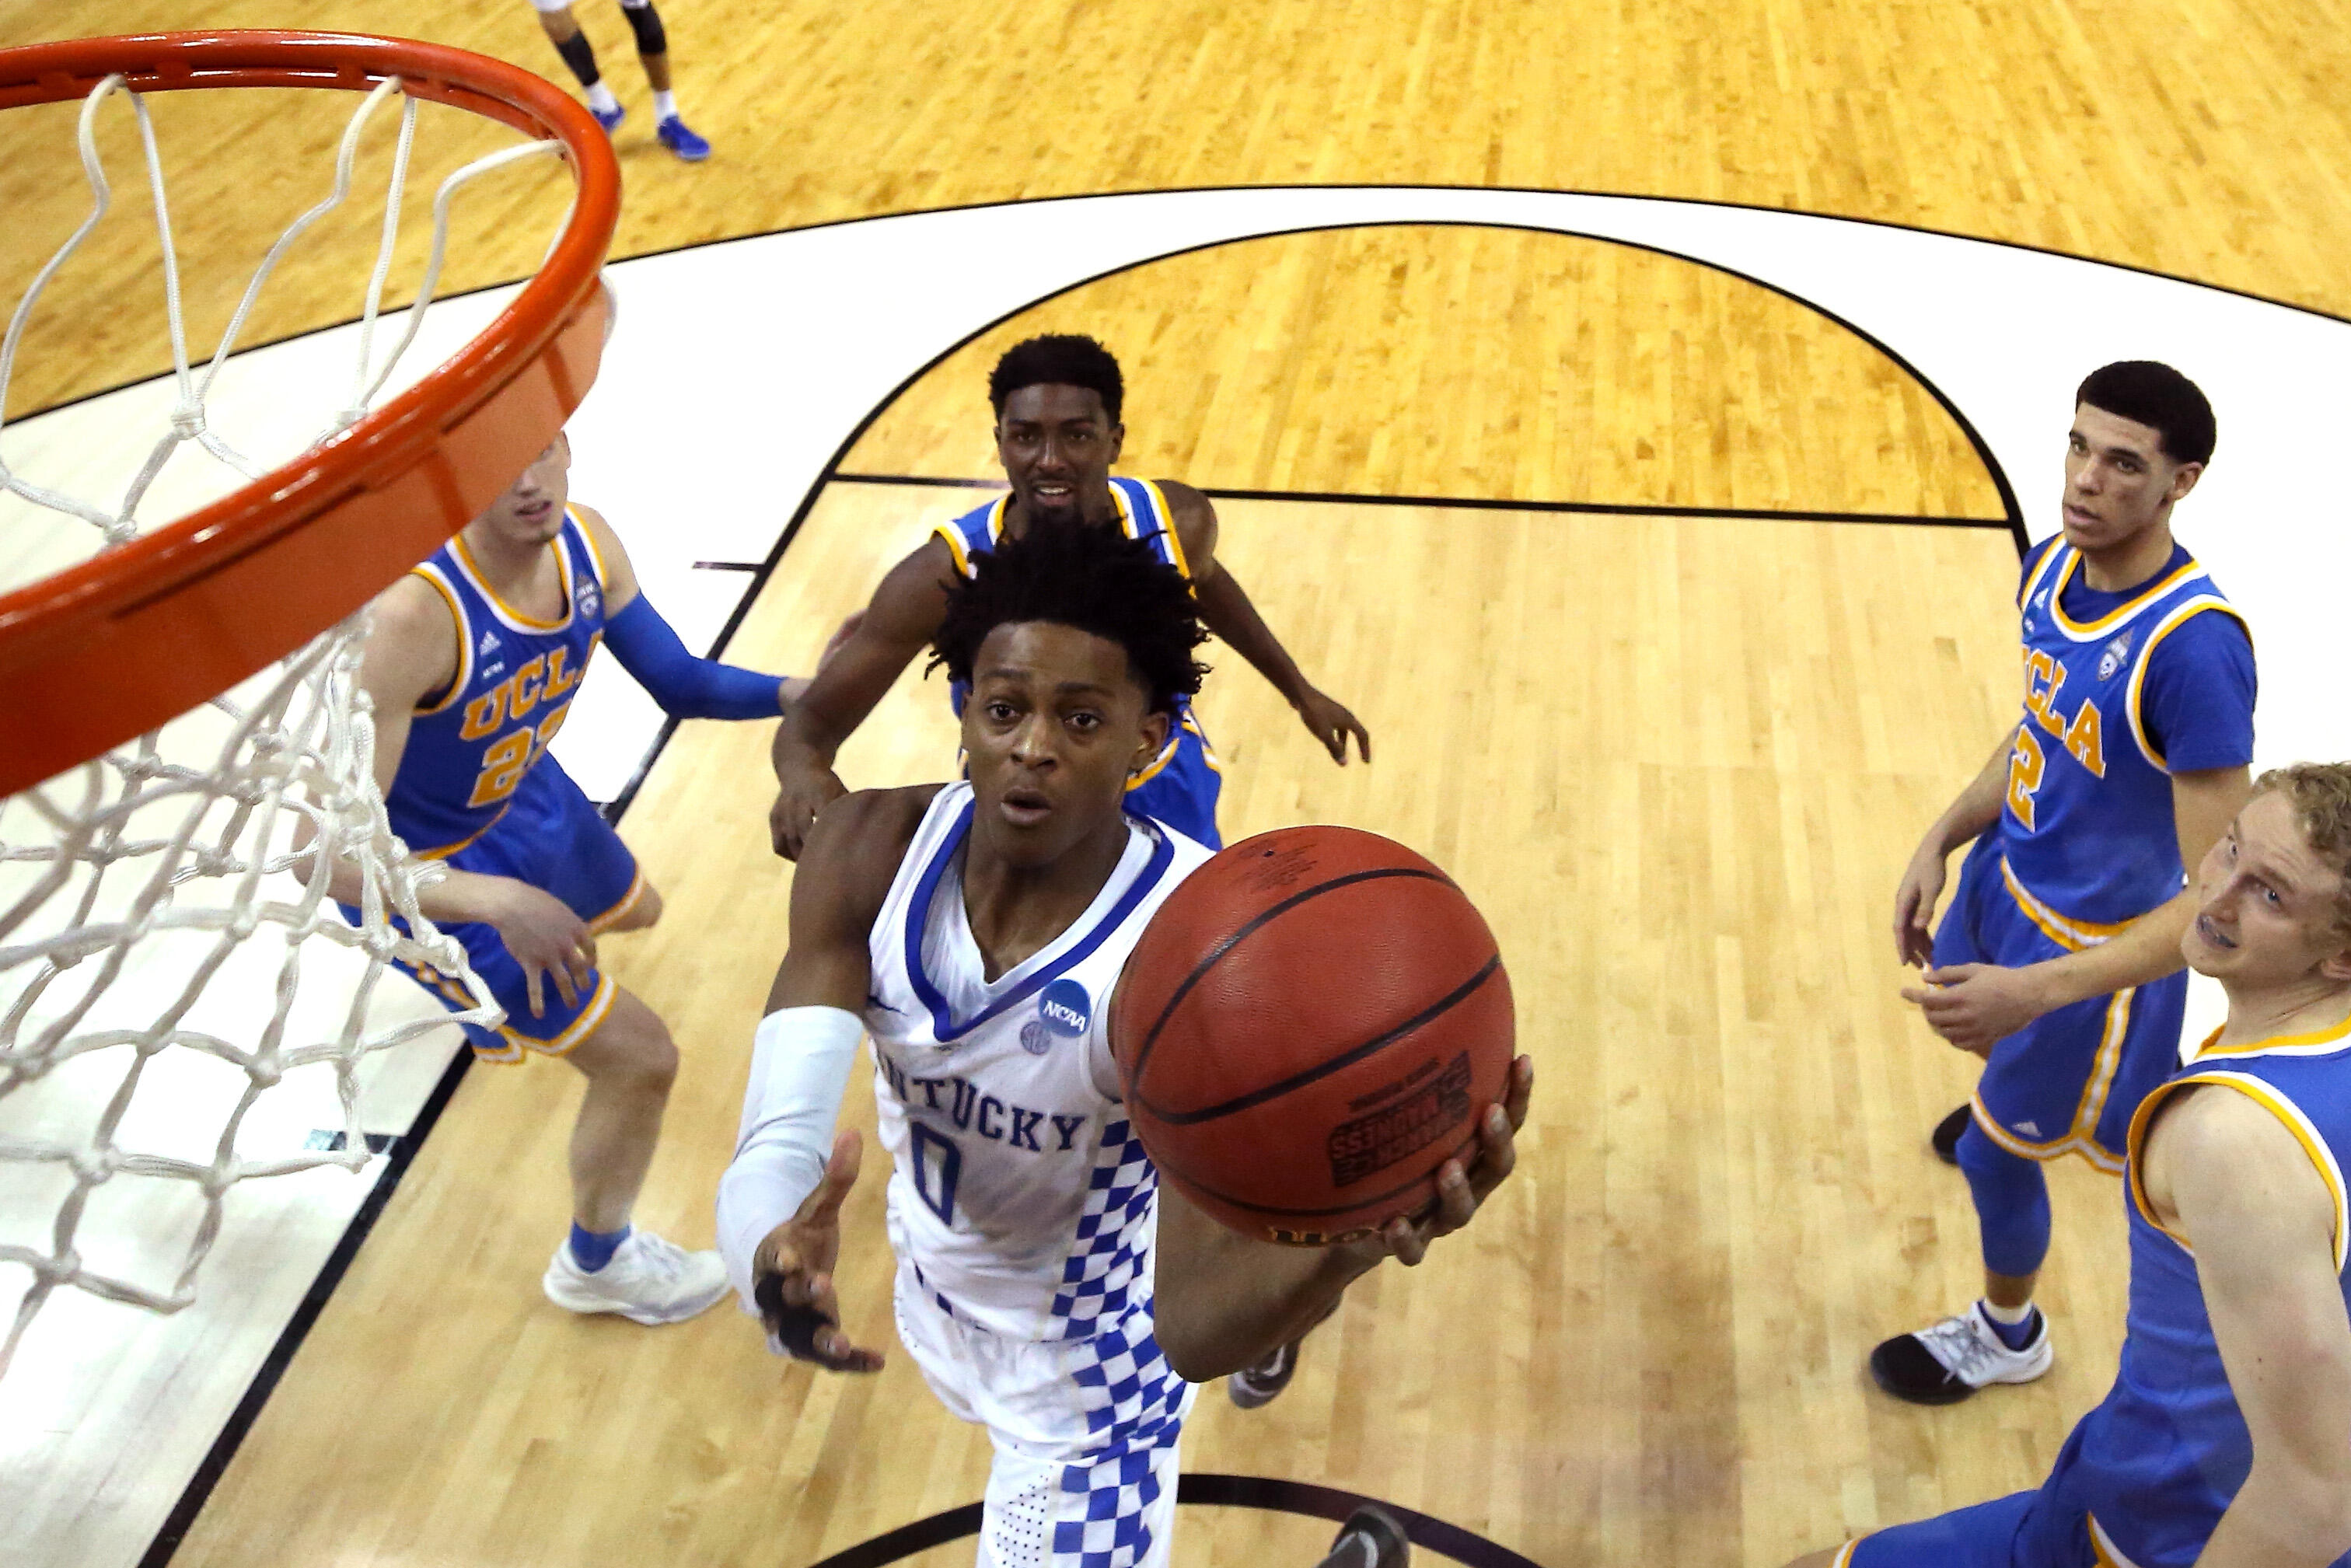 MEMPHIS, TN - MARCH 24: De'Aaron Fox #0 of the Kentucky Wildcats drives to the basket against the UCLA Bruins in the second half during the 2017 NCAA Men's Basketball Tournament South Regional at FedExForum on March 24, 2017 in Memphis, Tennessee.  (Photo